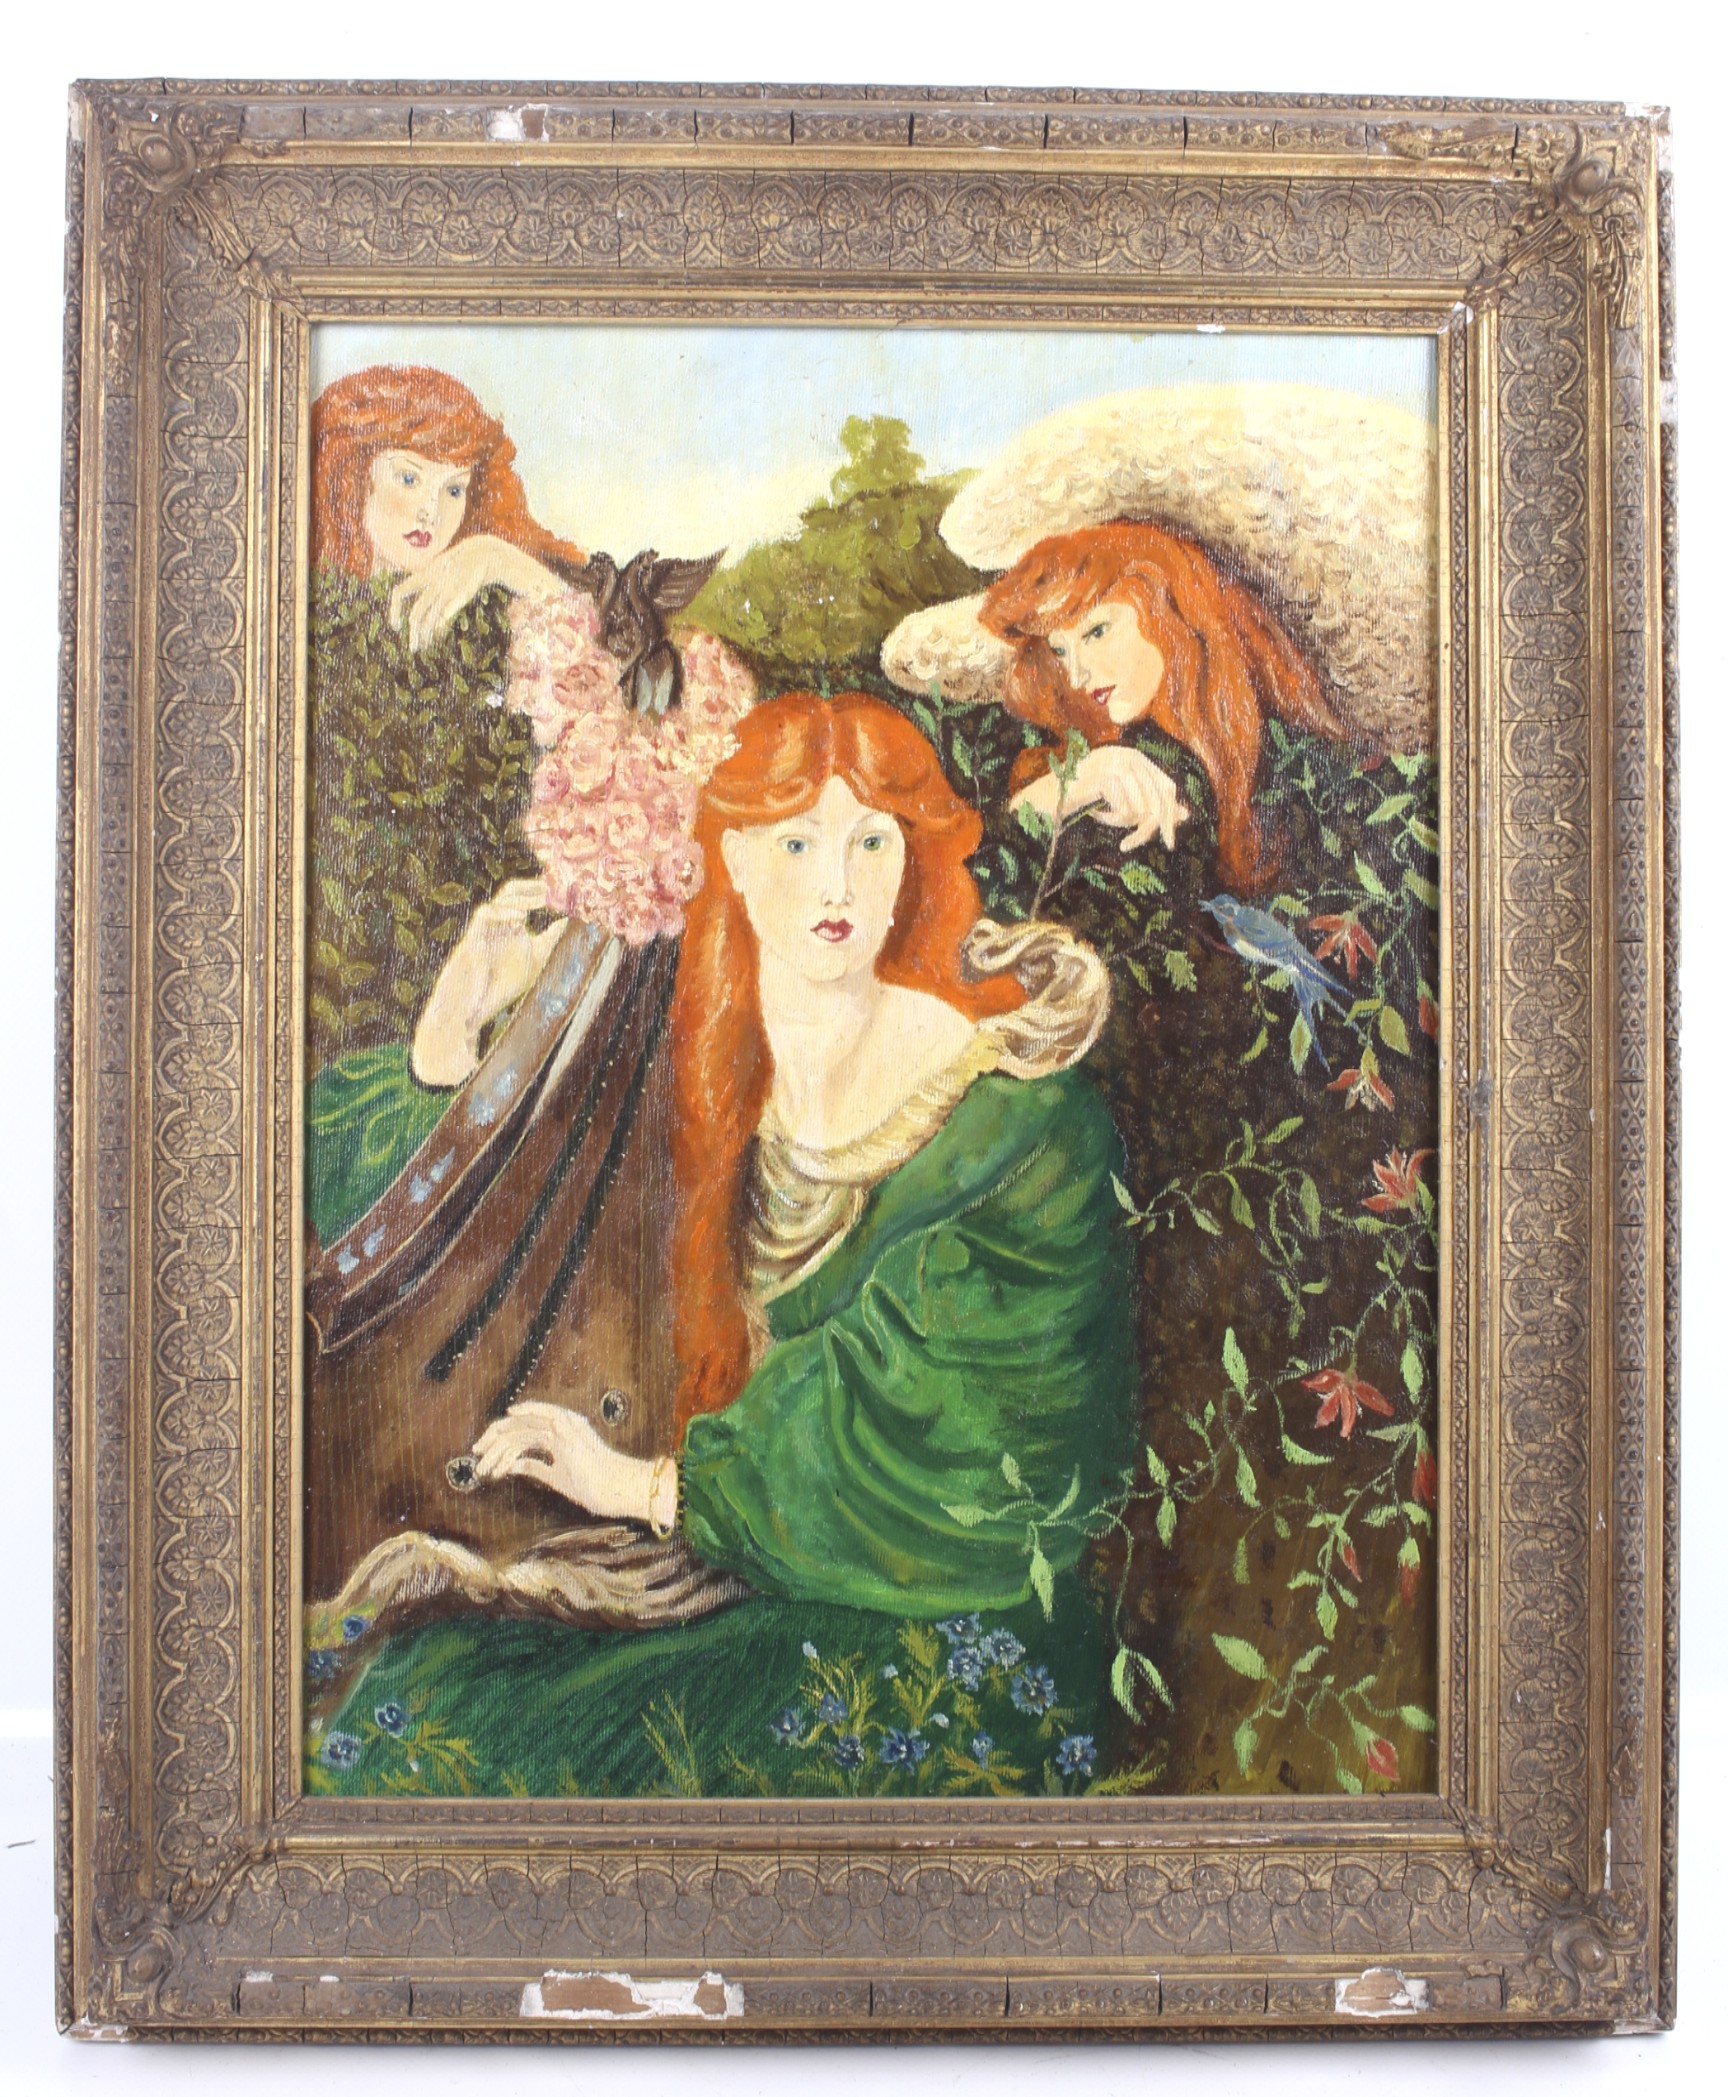 A Pre-Raphaelite style oil on canvas. Depicting three women dressed in medieval attire. - Image 2 of 2